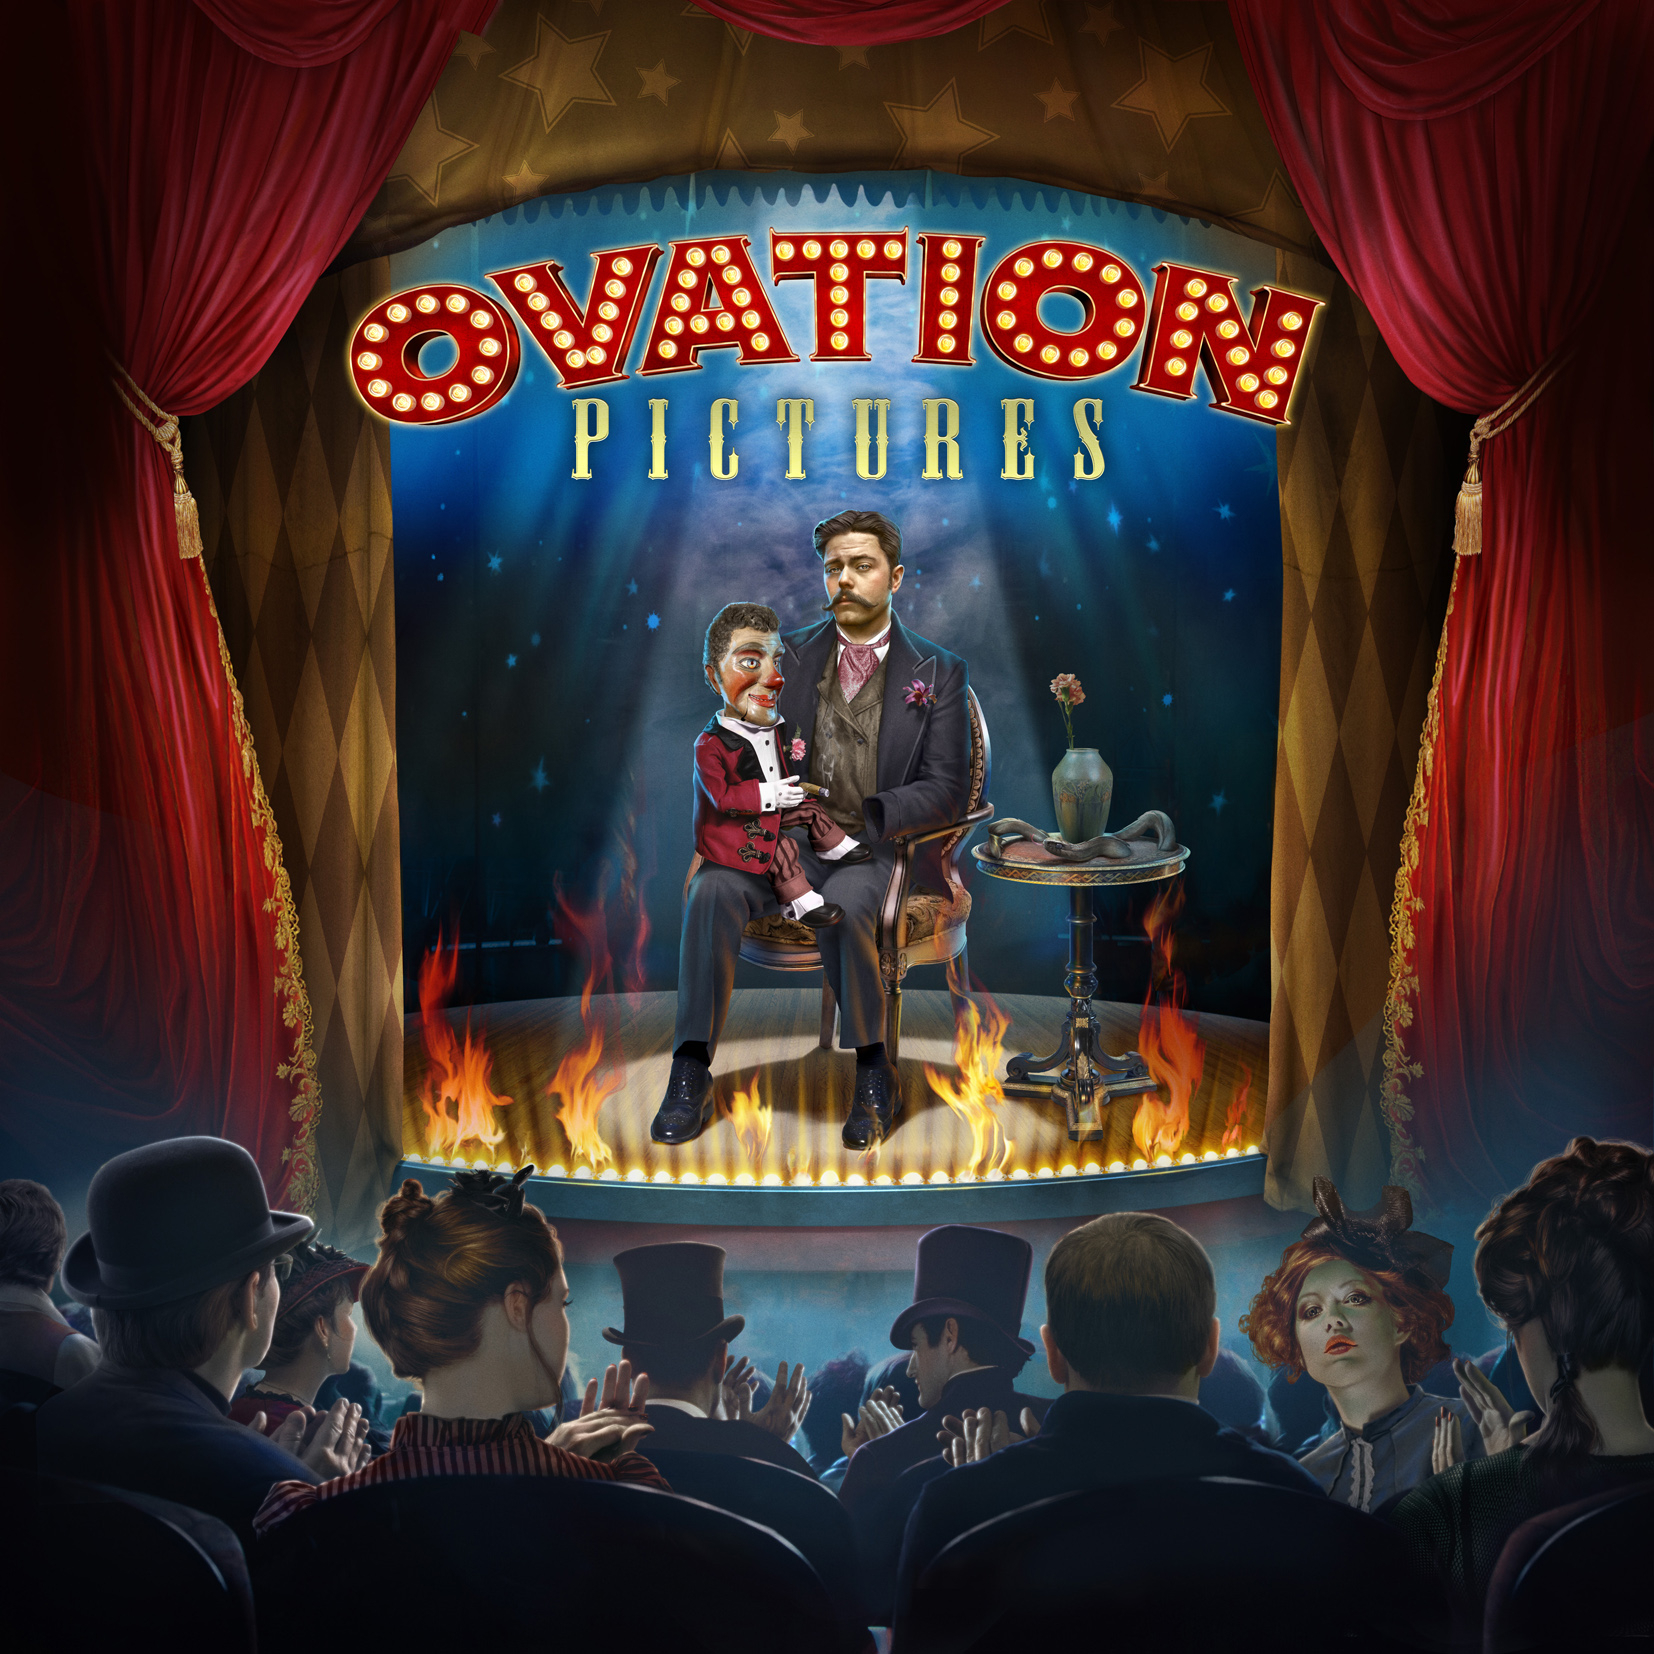 Ovation Pictures